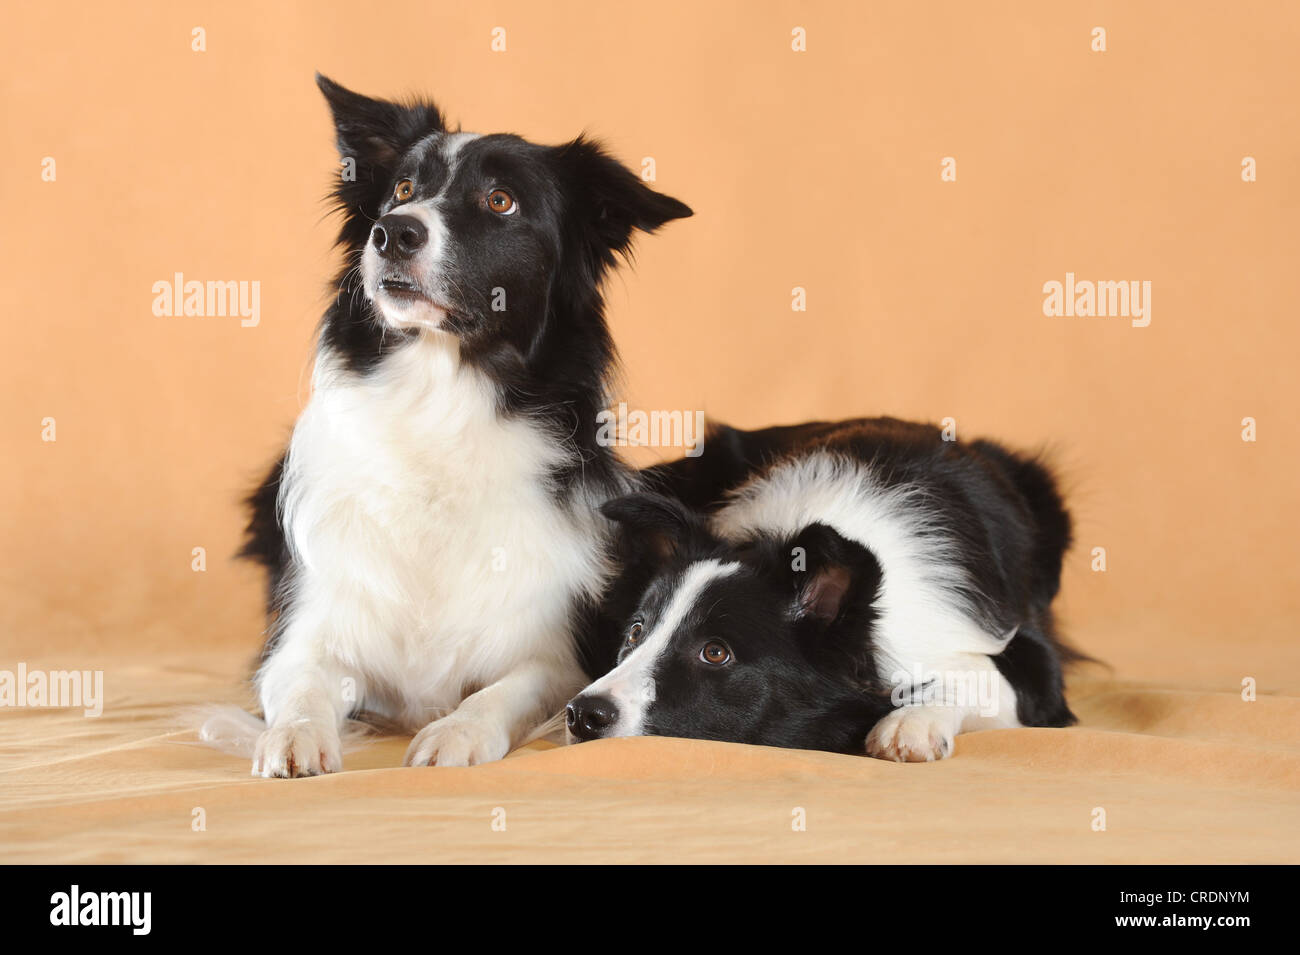 Black And White Collies High Resolution Stock Photography and Images - Alamy